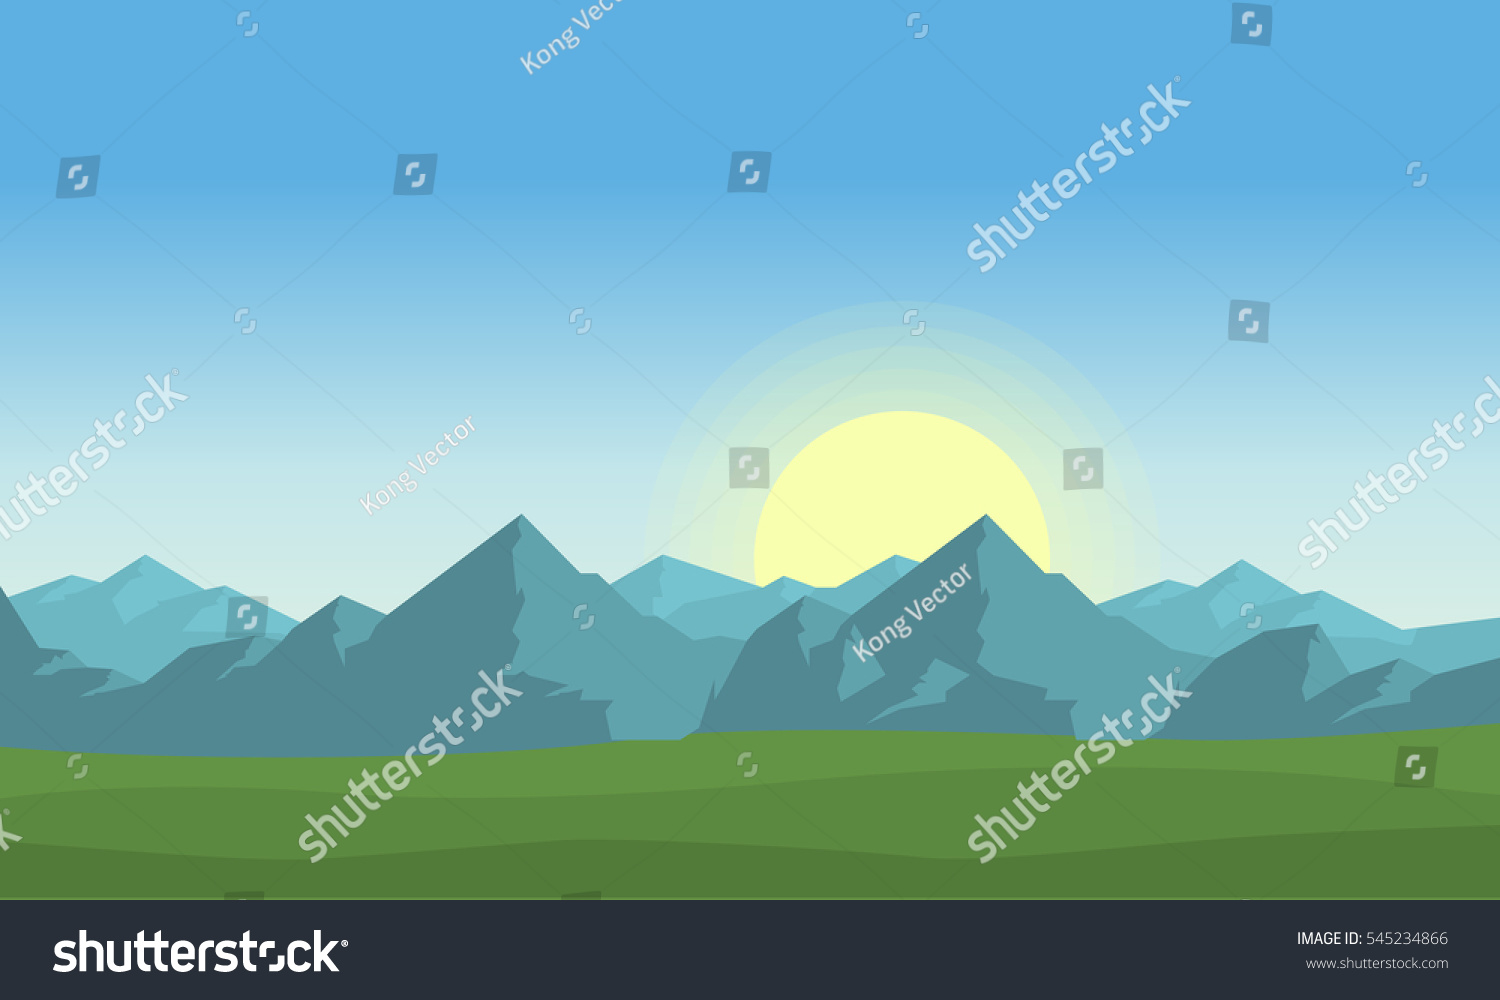 At morning mountain landscape vector #545234866